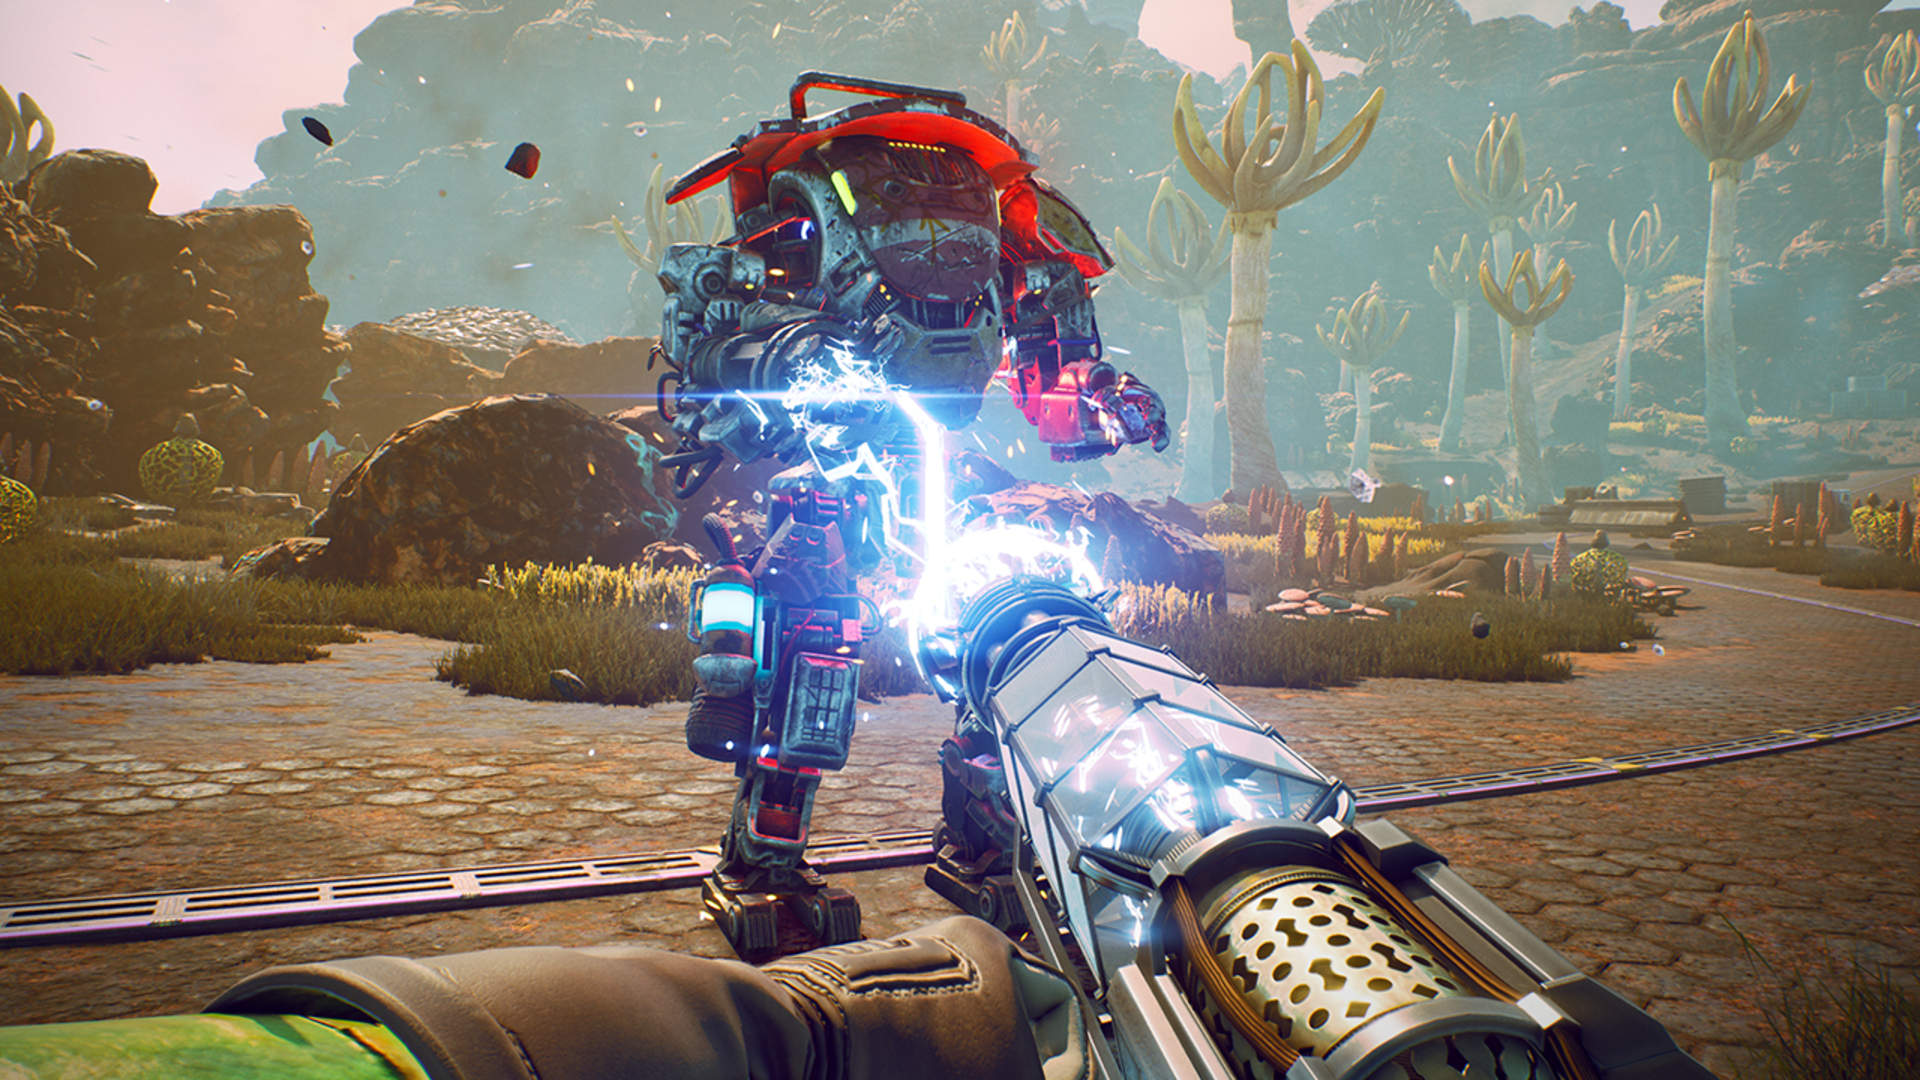 The Outer Worlds now optimized for PS5 and Xbox Series X